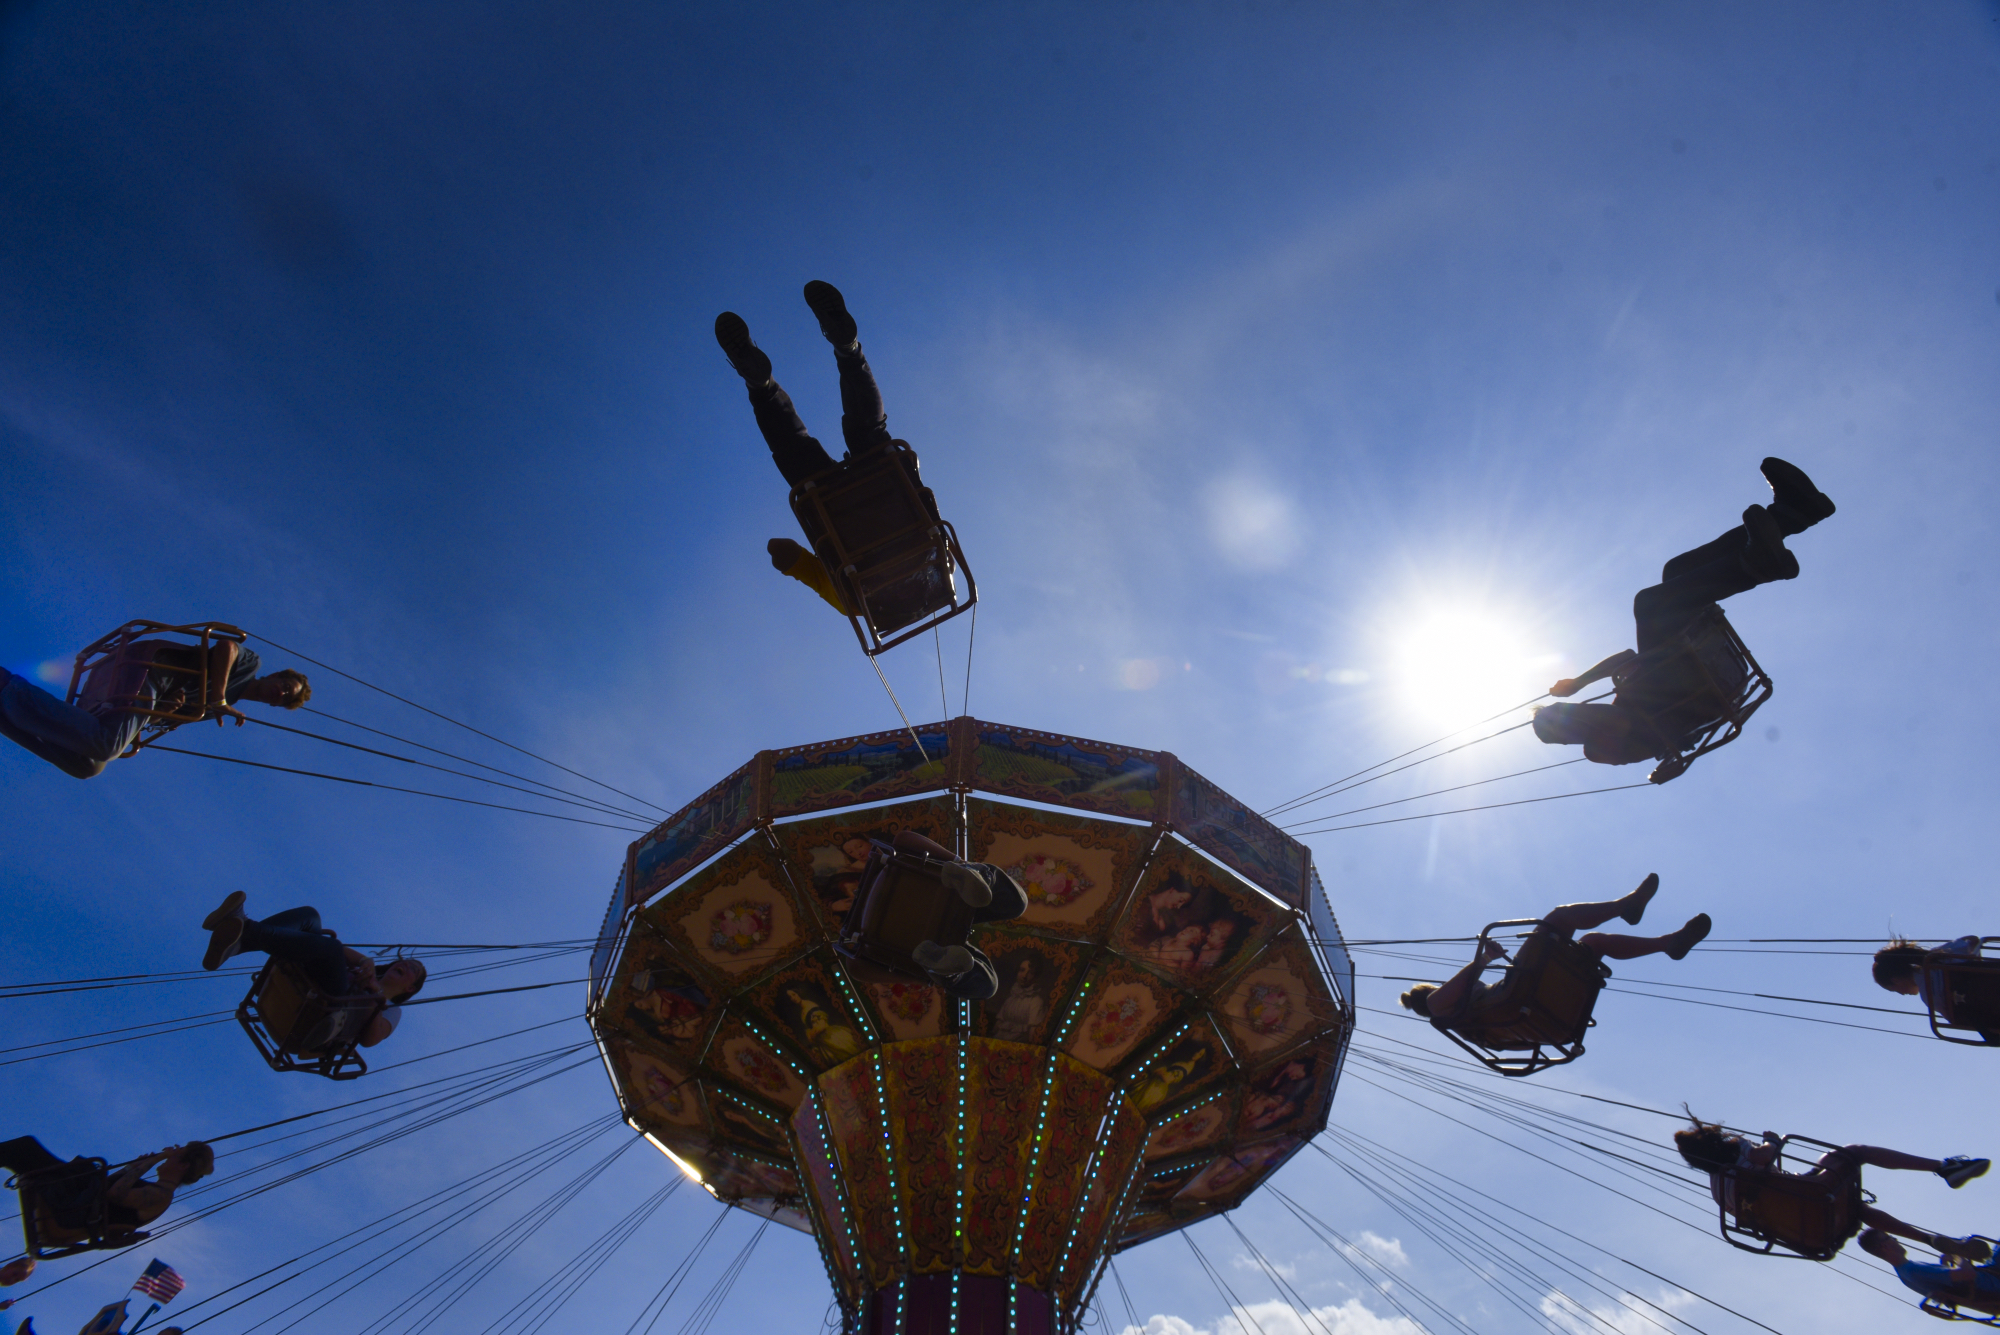 Altamont Fair: Everything you need to know